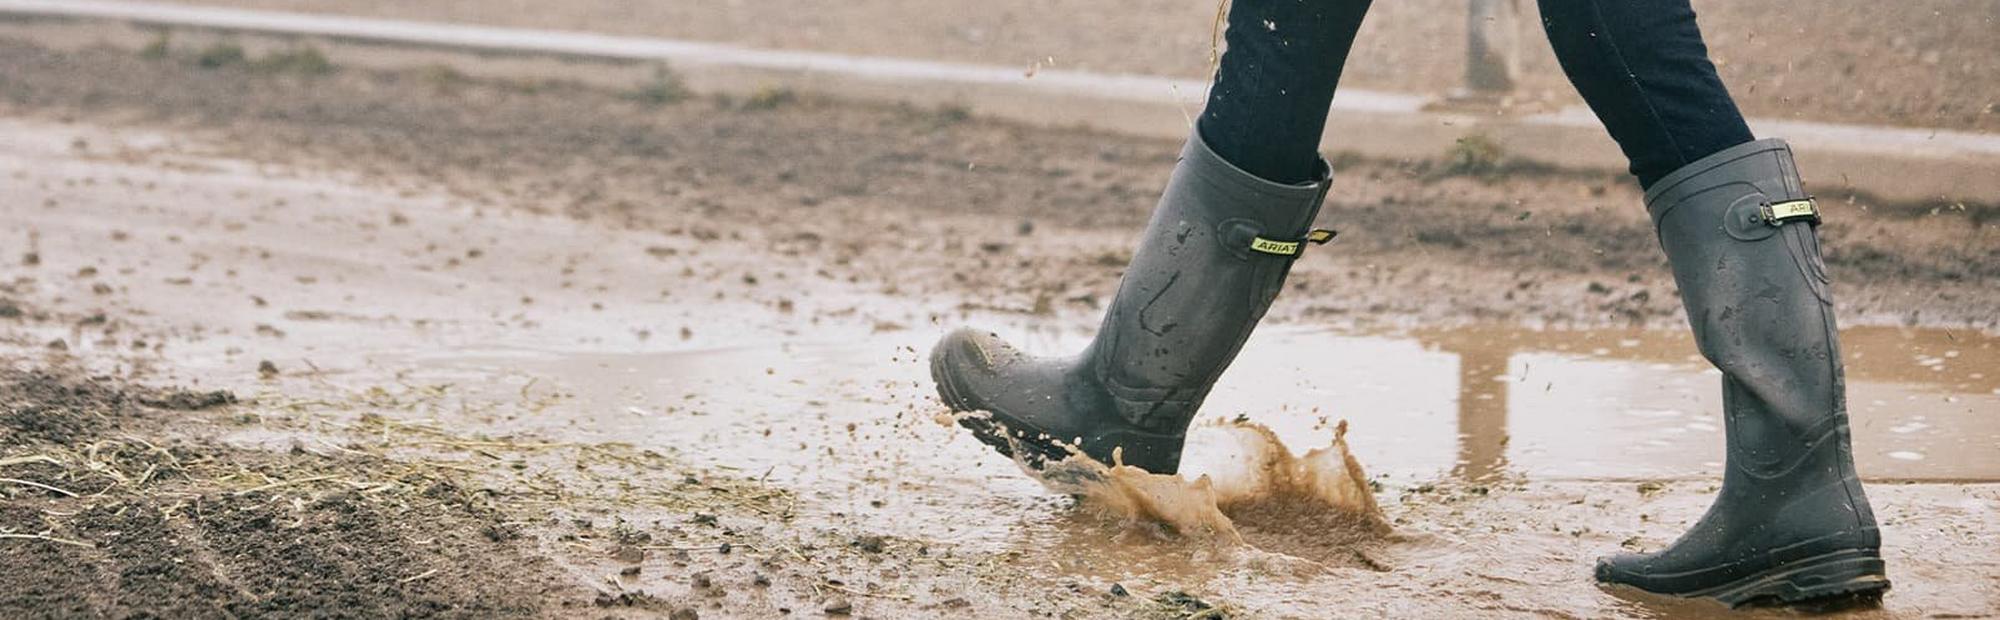 How To Clean Muck Boots | Ariat